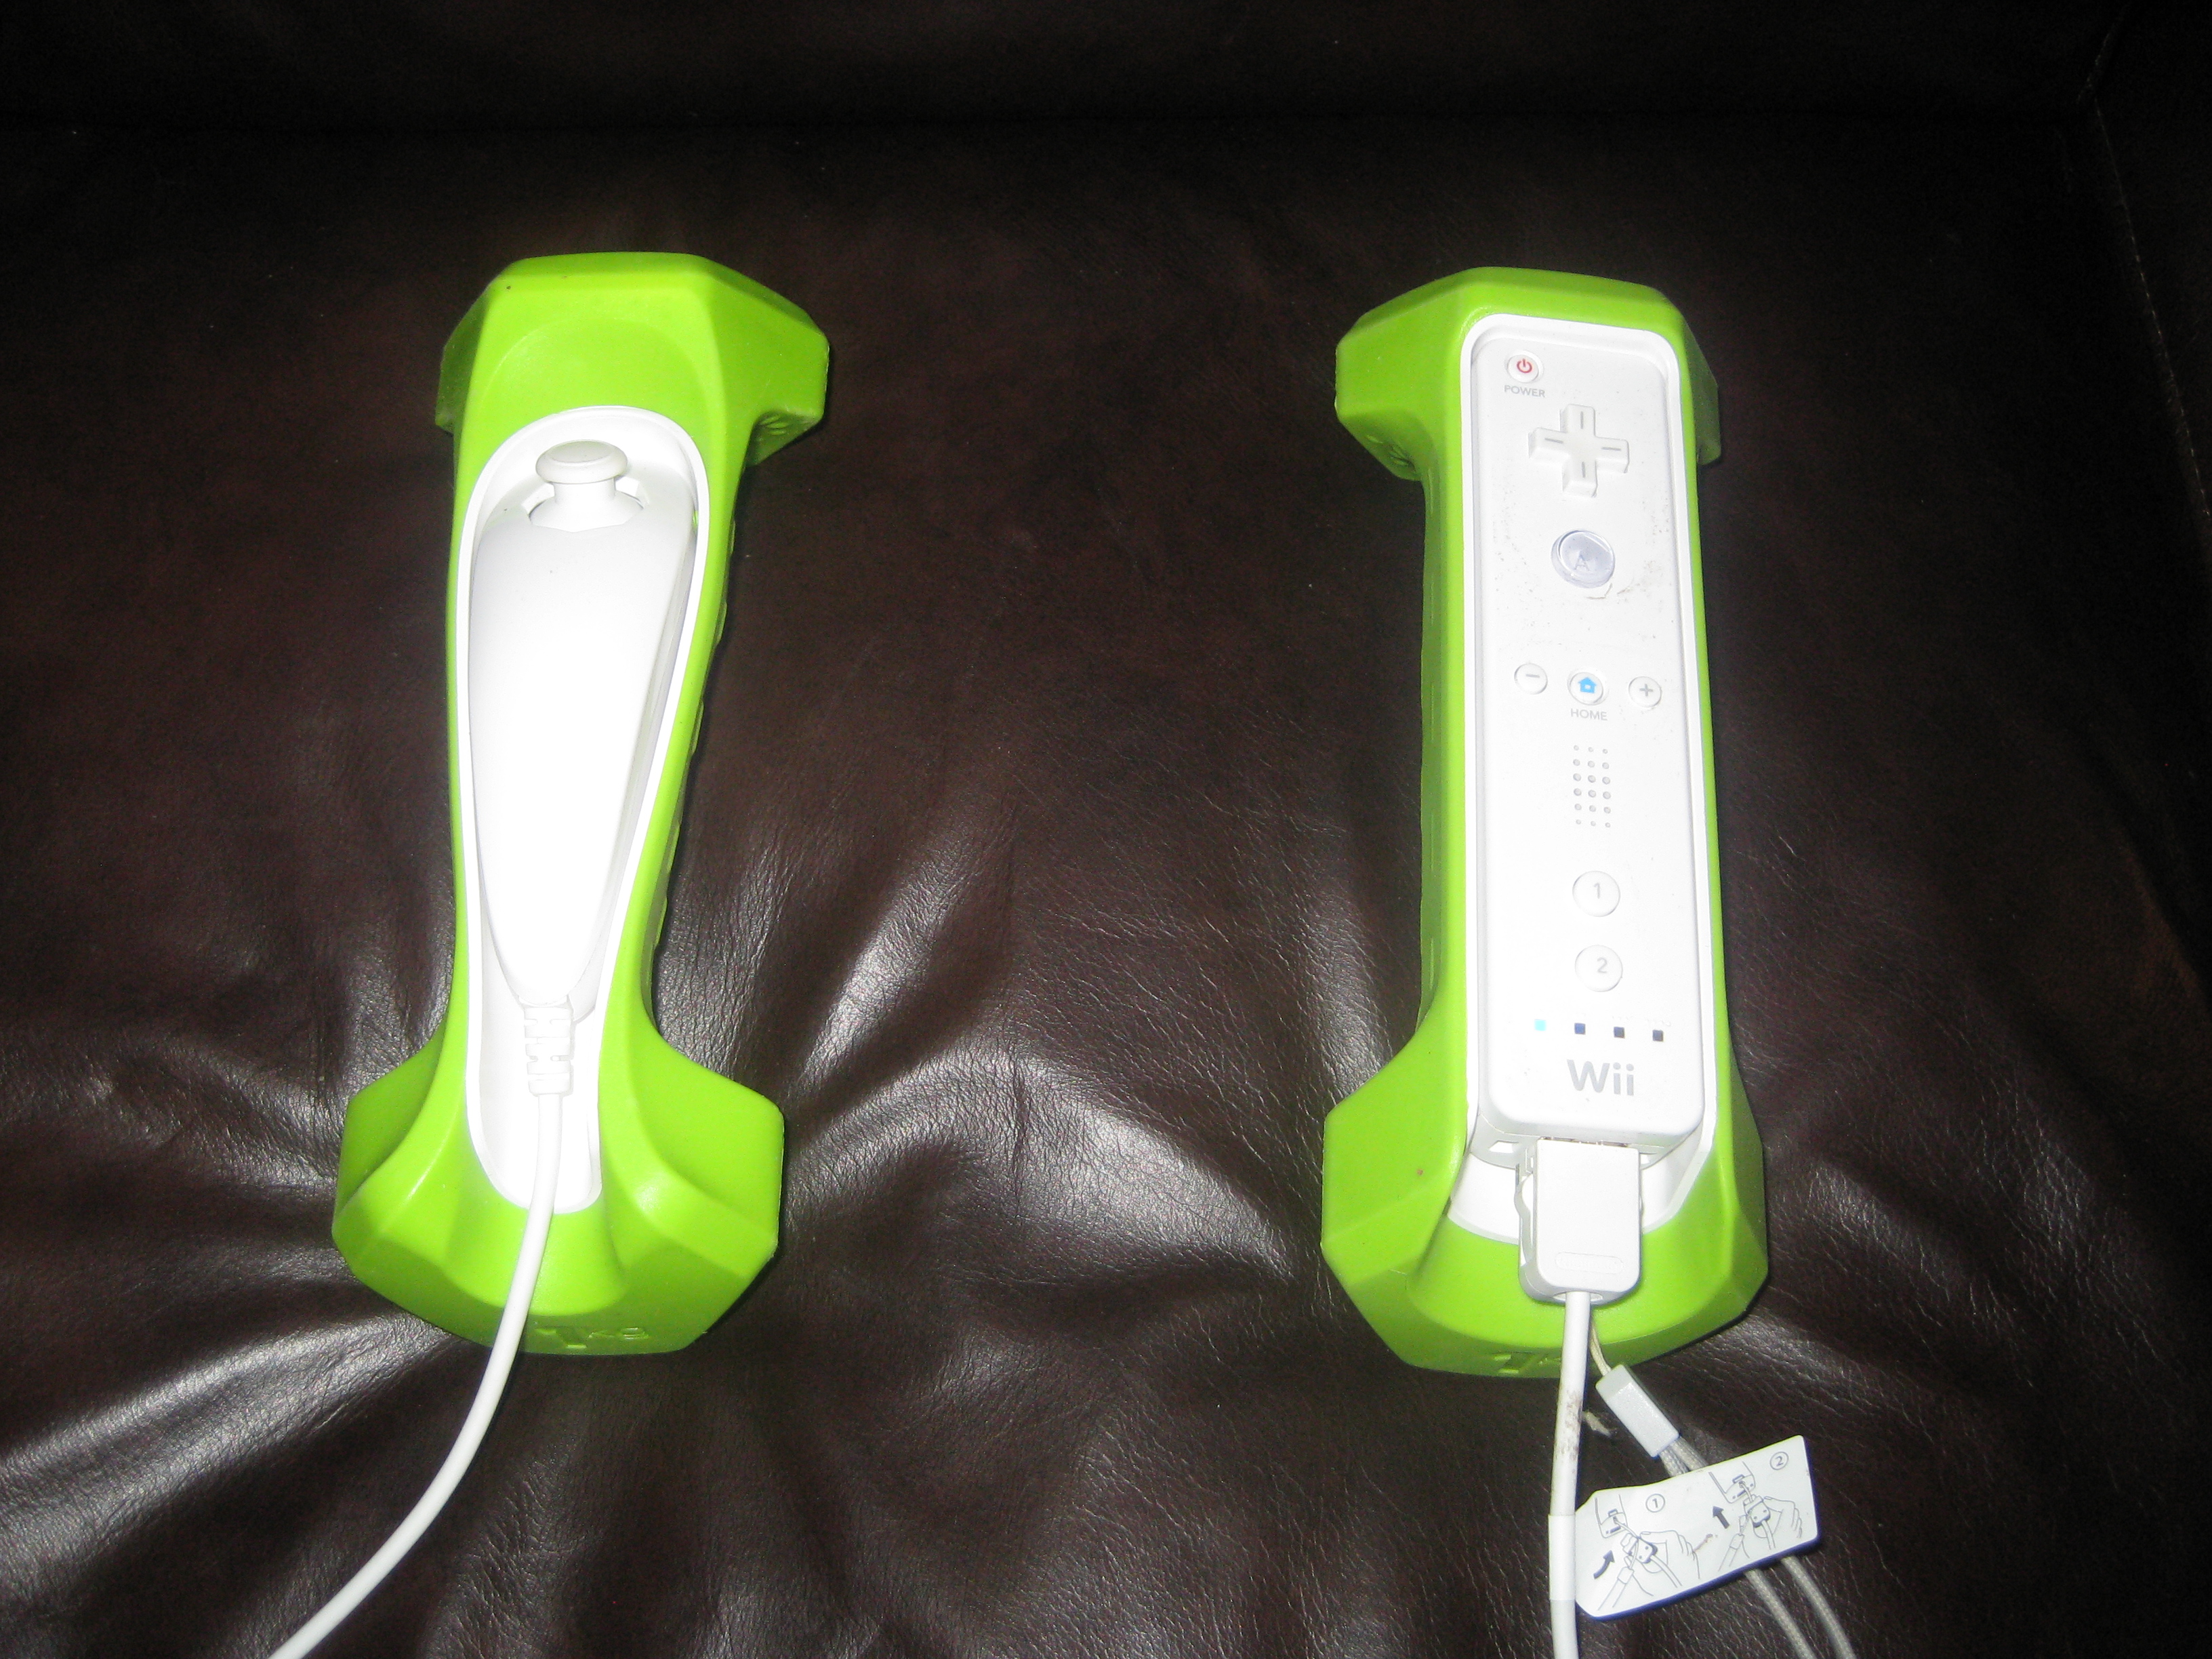 RiiFlex weights with the Wii remote and the nunchuk inserted